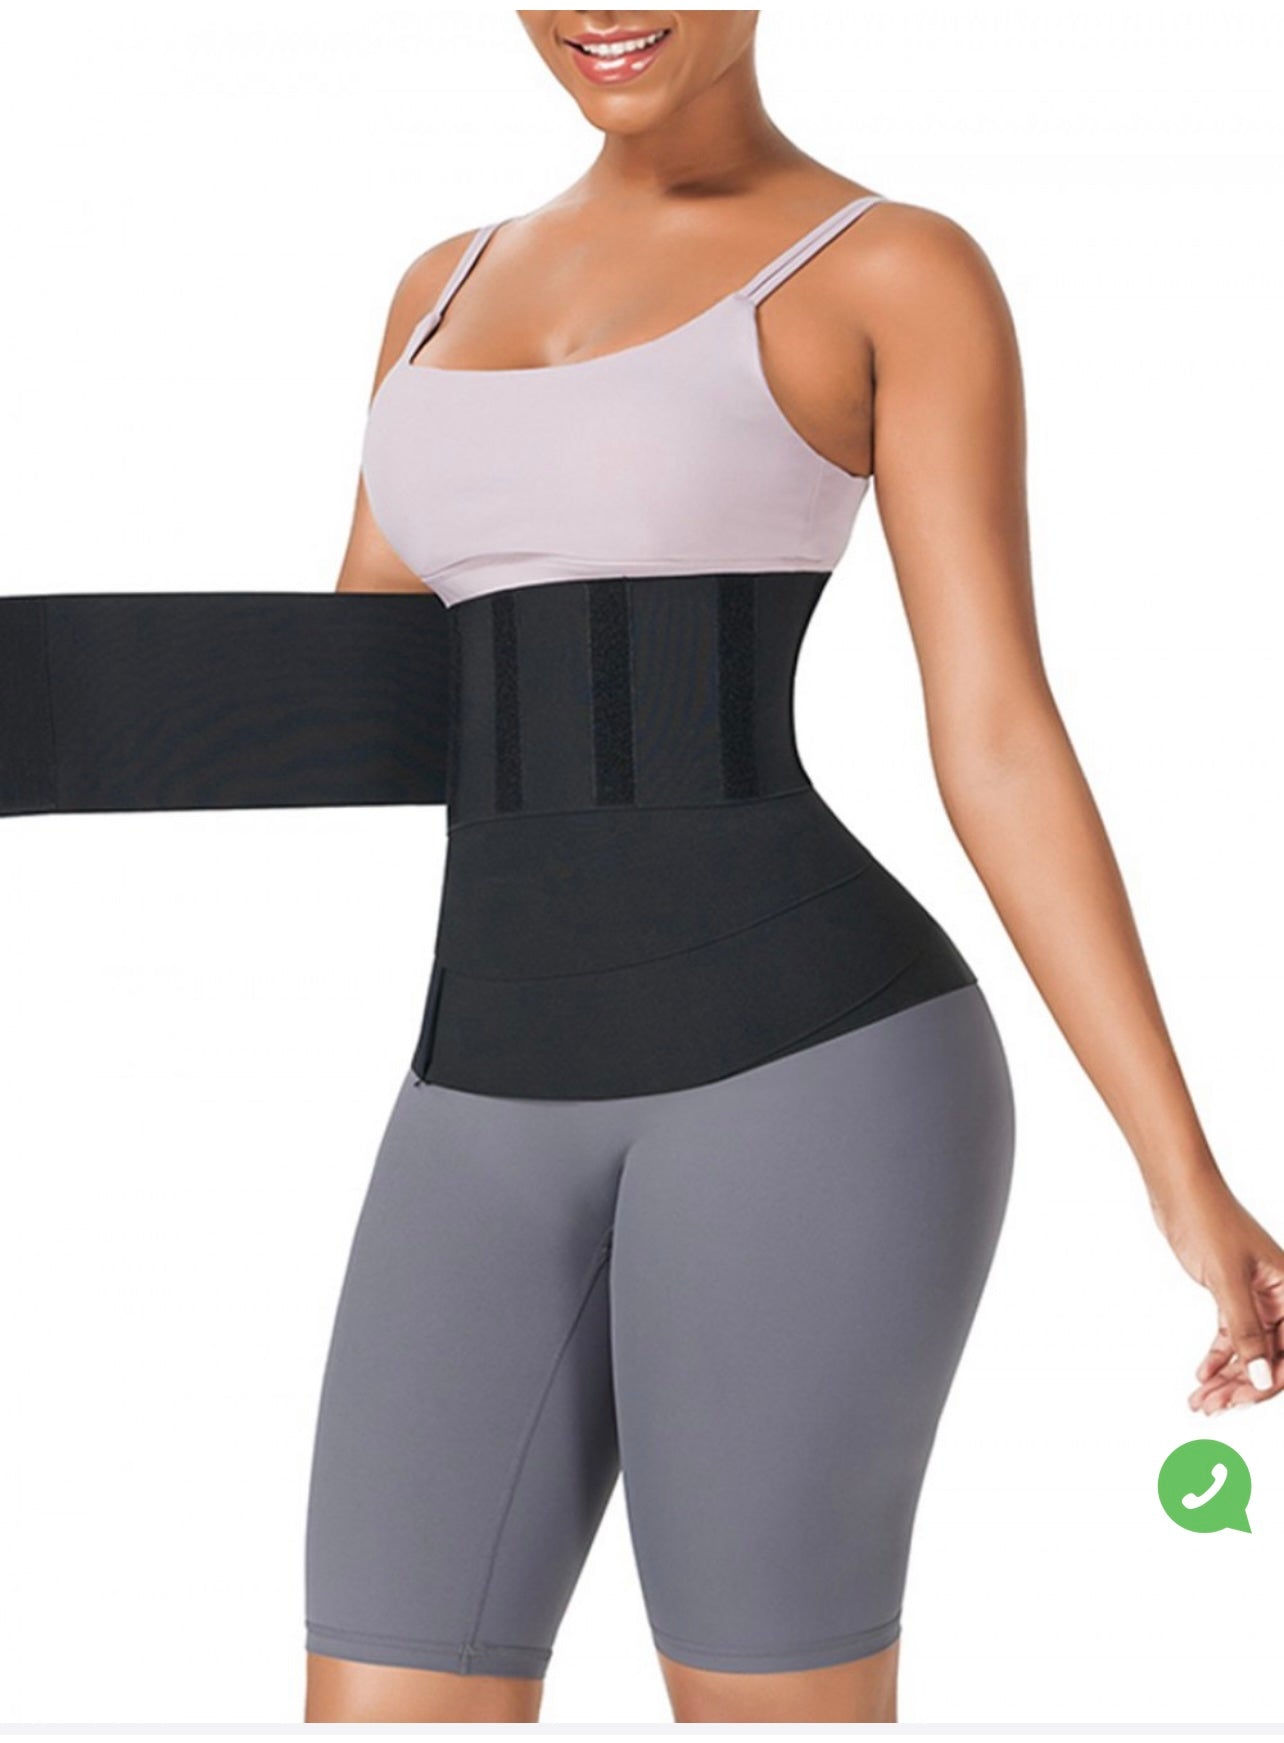 EasyWrap Waist Trainer/ One size fit all - WrapAndTuck